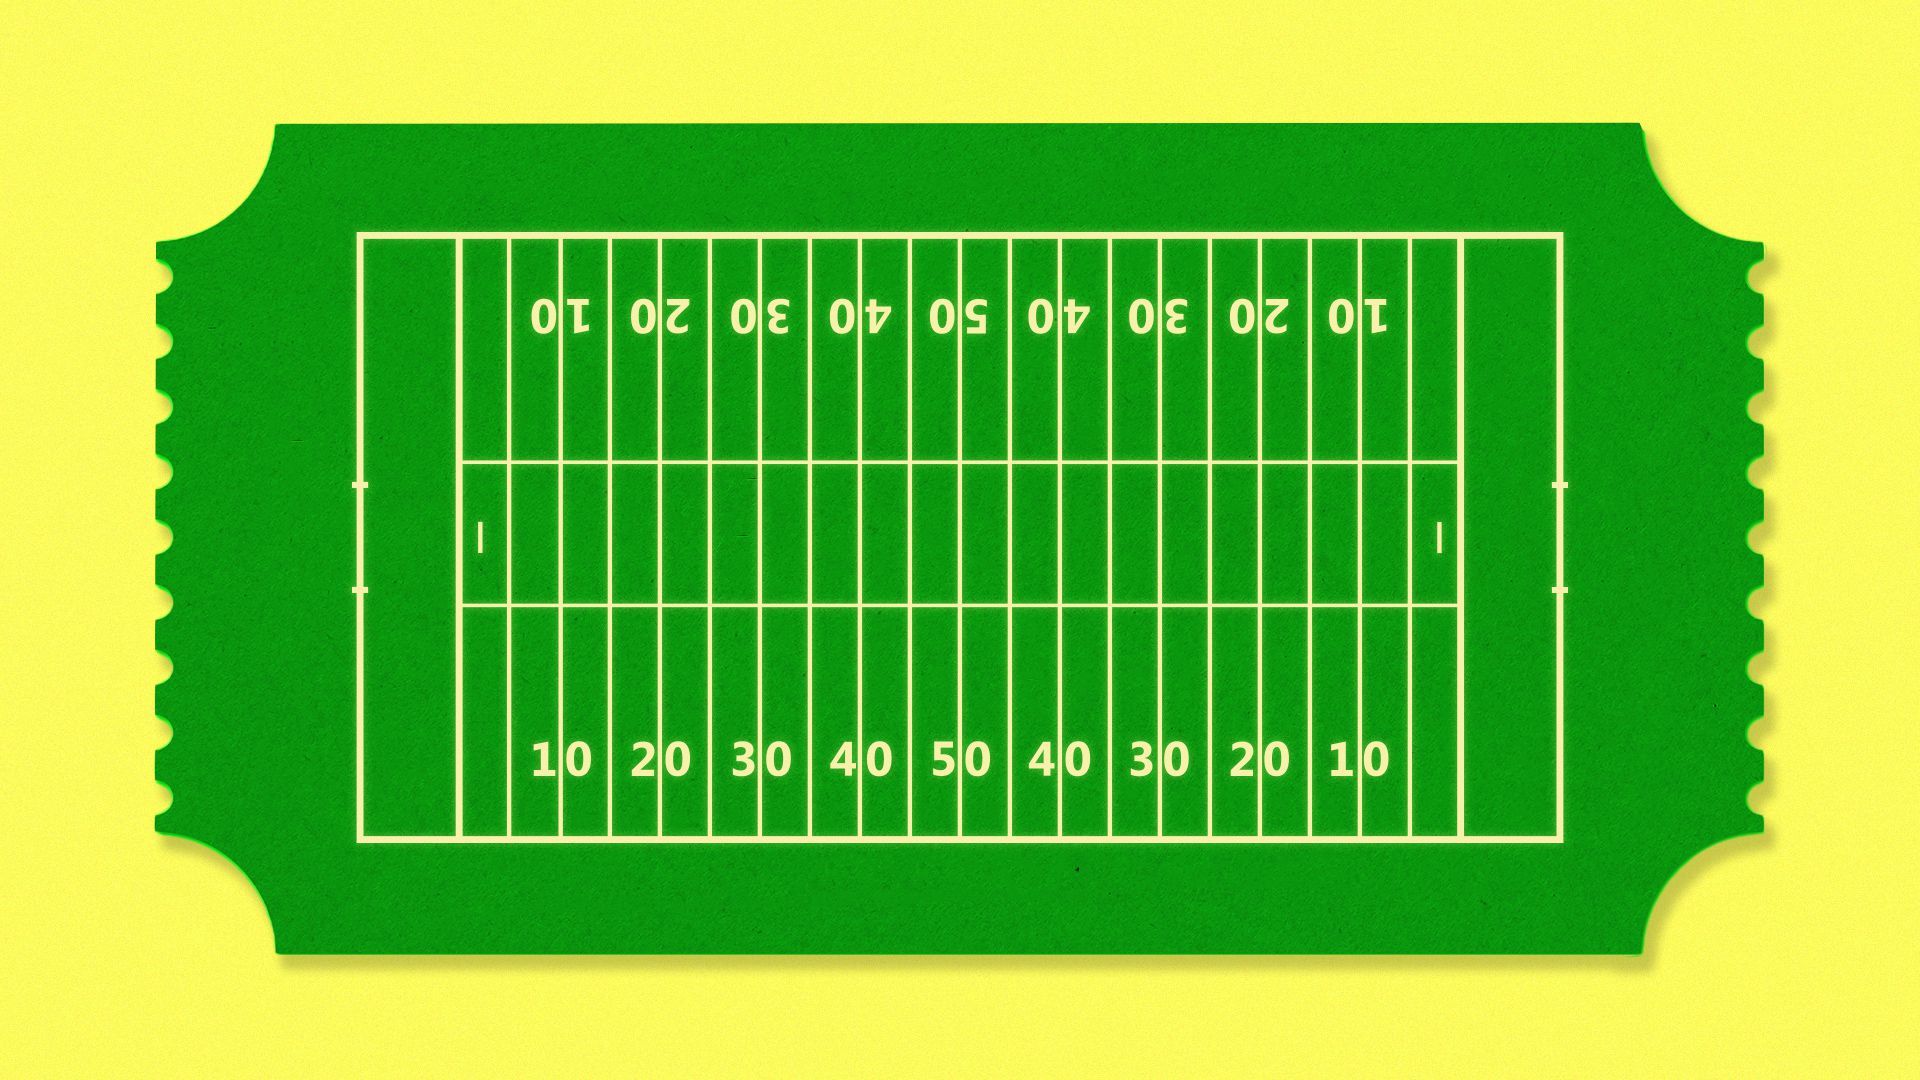 Illustration of a ticket that looks like a football field